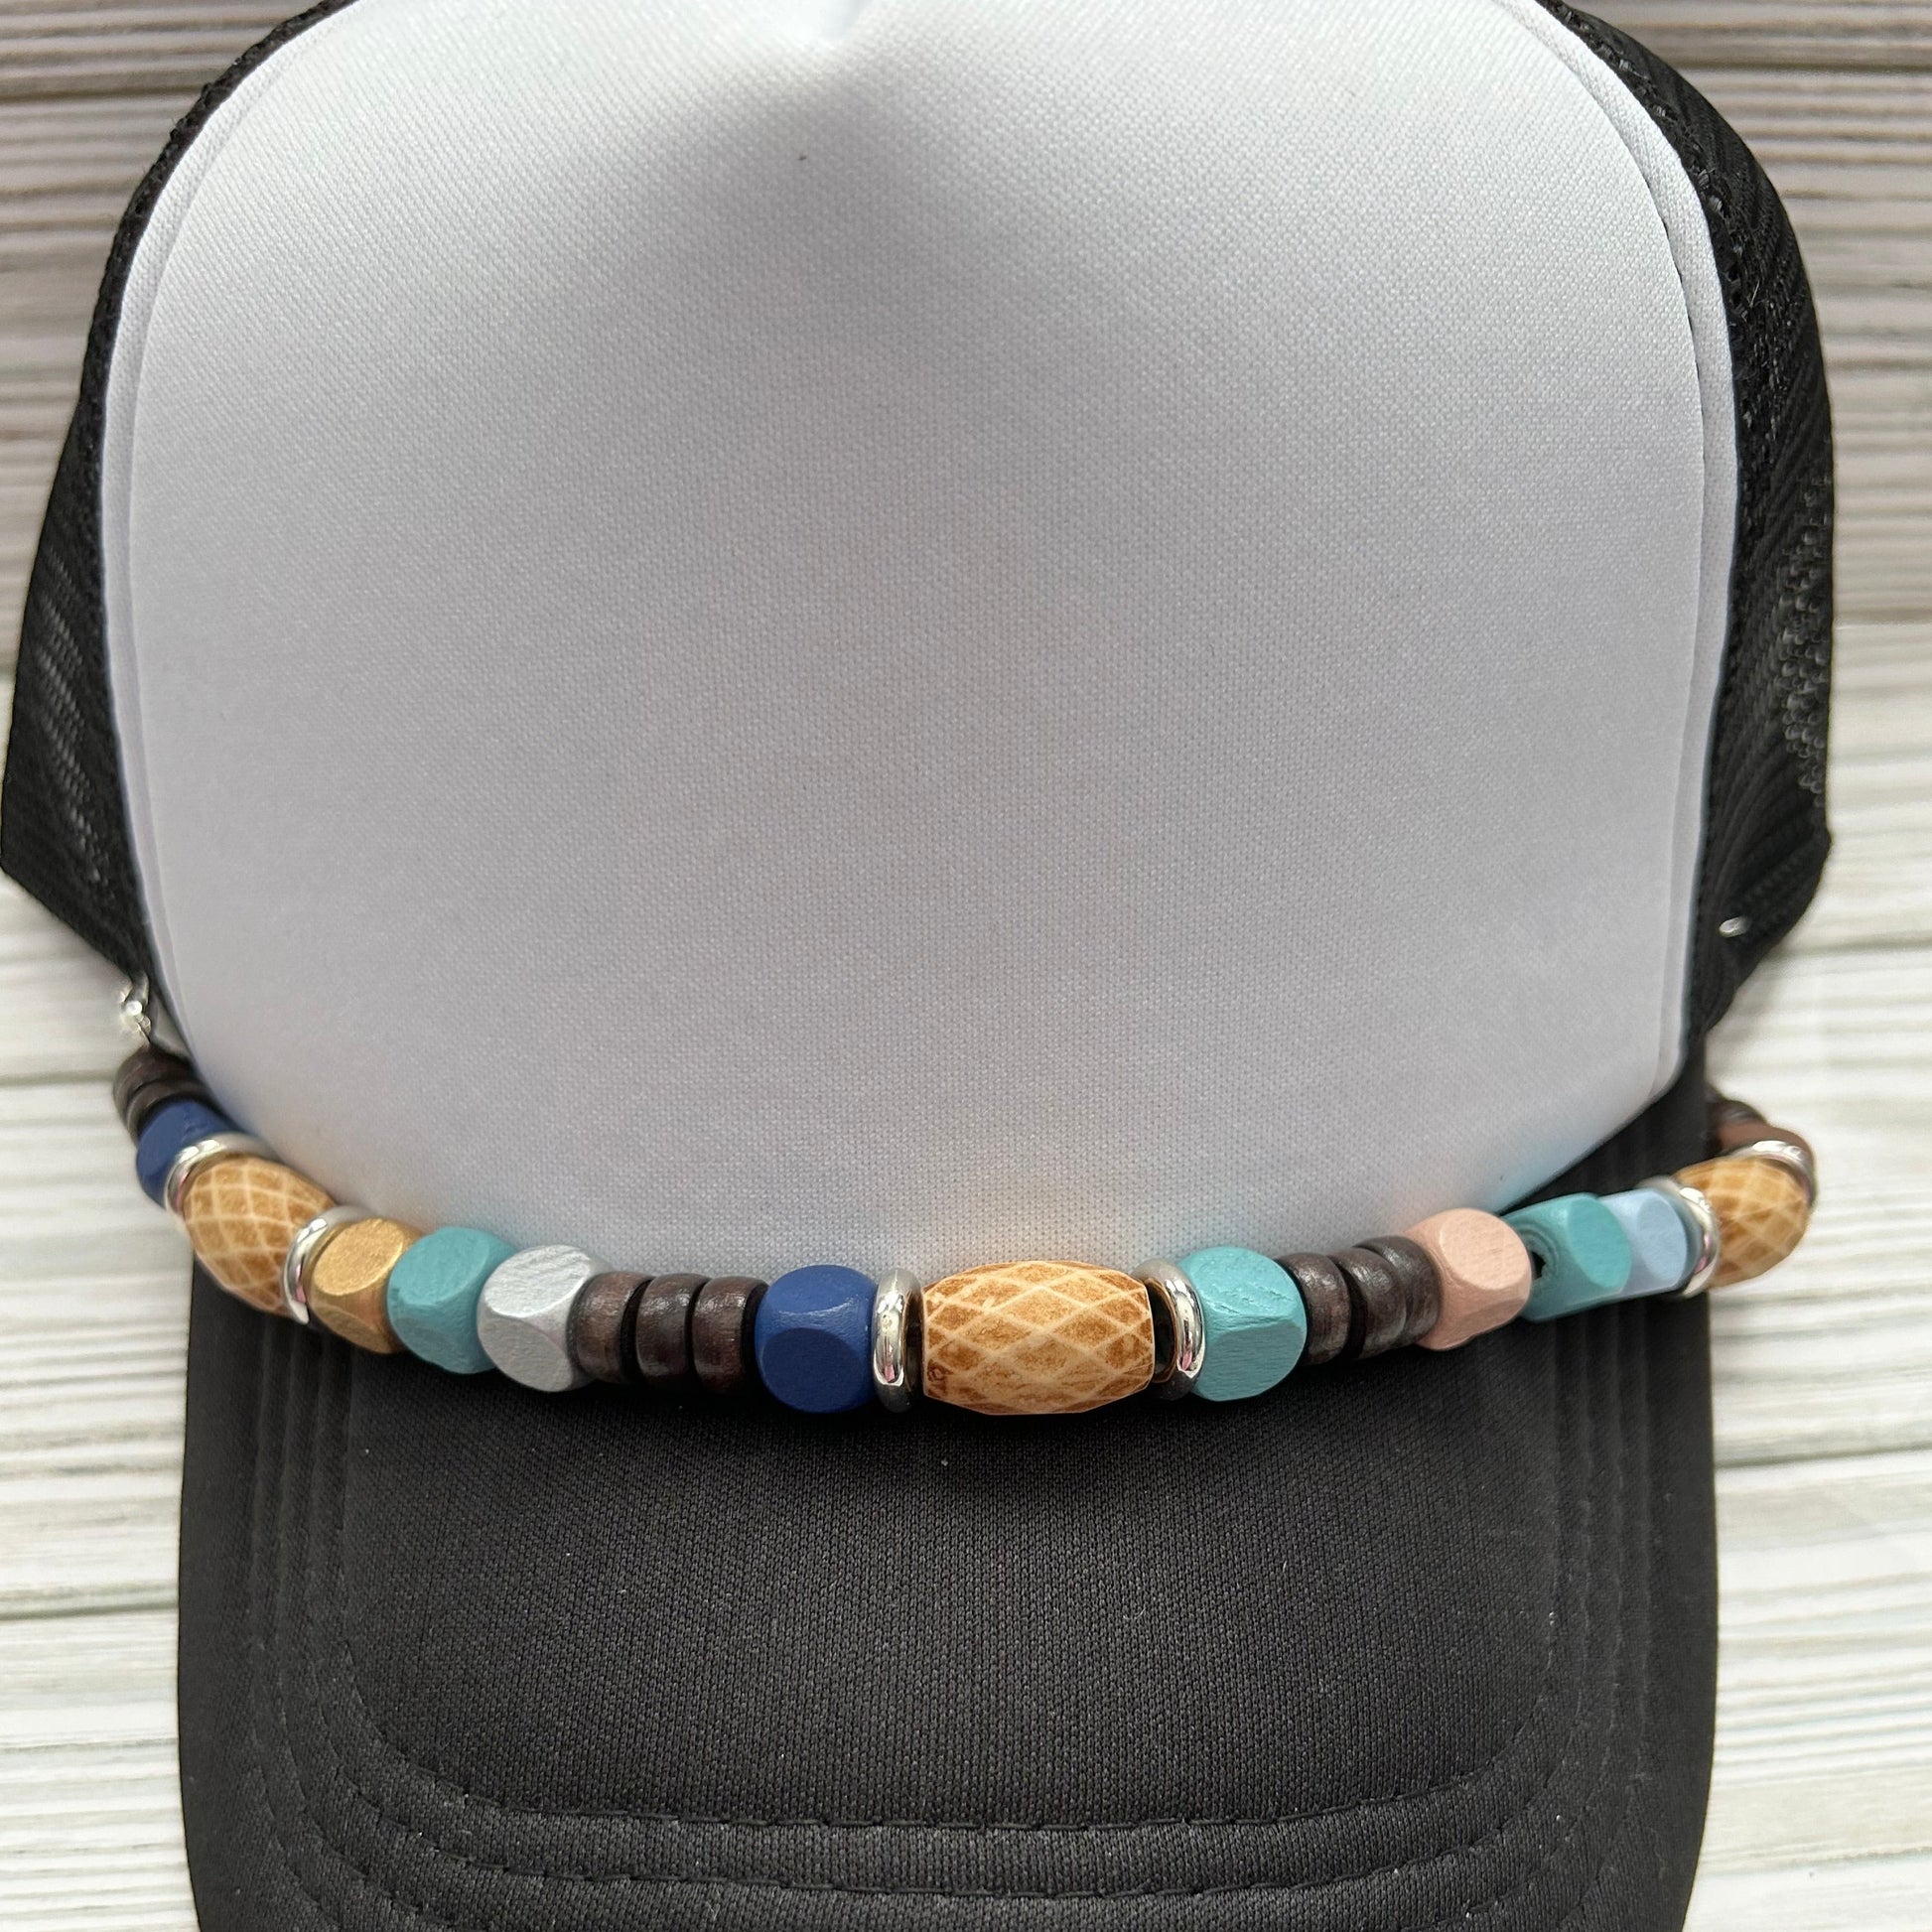 Hat chain for trucker hats with wooden beads